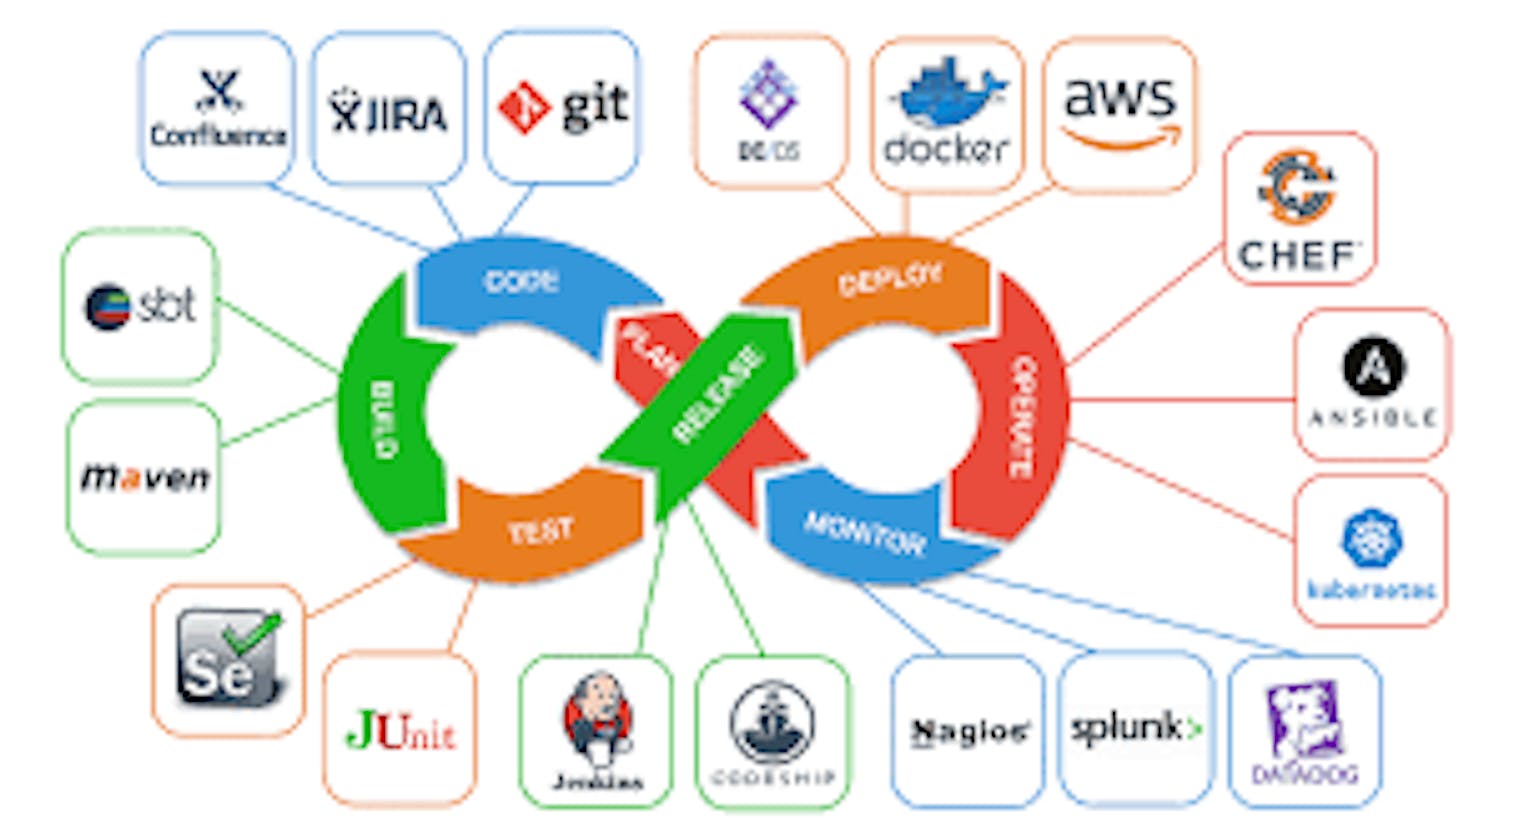 Comprehensive Overview of Continuous Integration and Continuous Deployment (CI/CD)